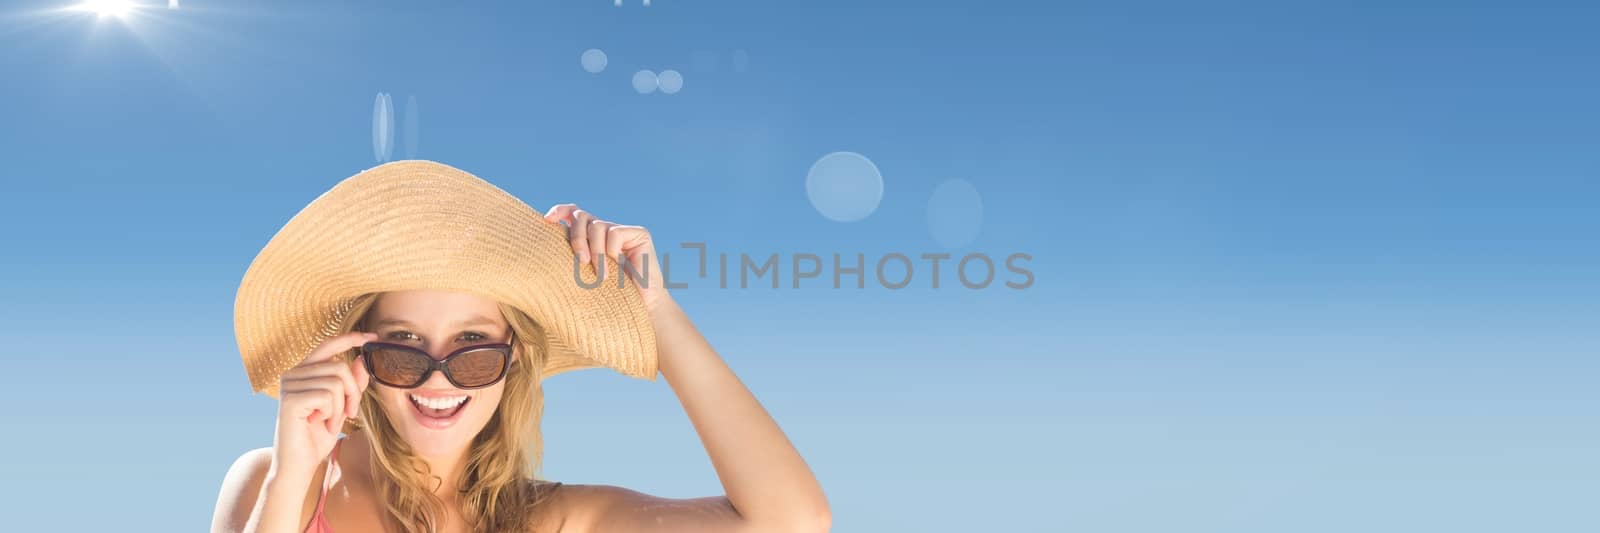 Millennial woman in sun hat and sunglasses against Summer sky with flare by Wavebreakmedia